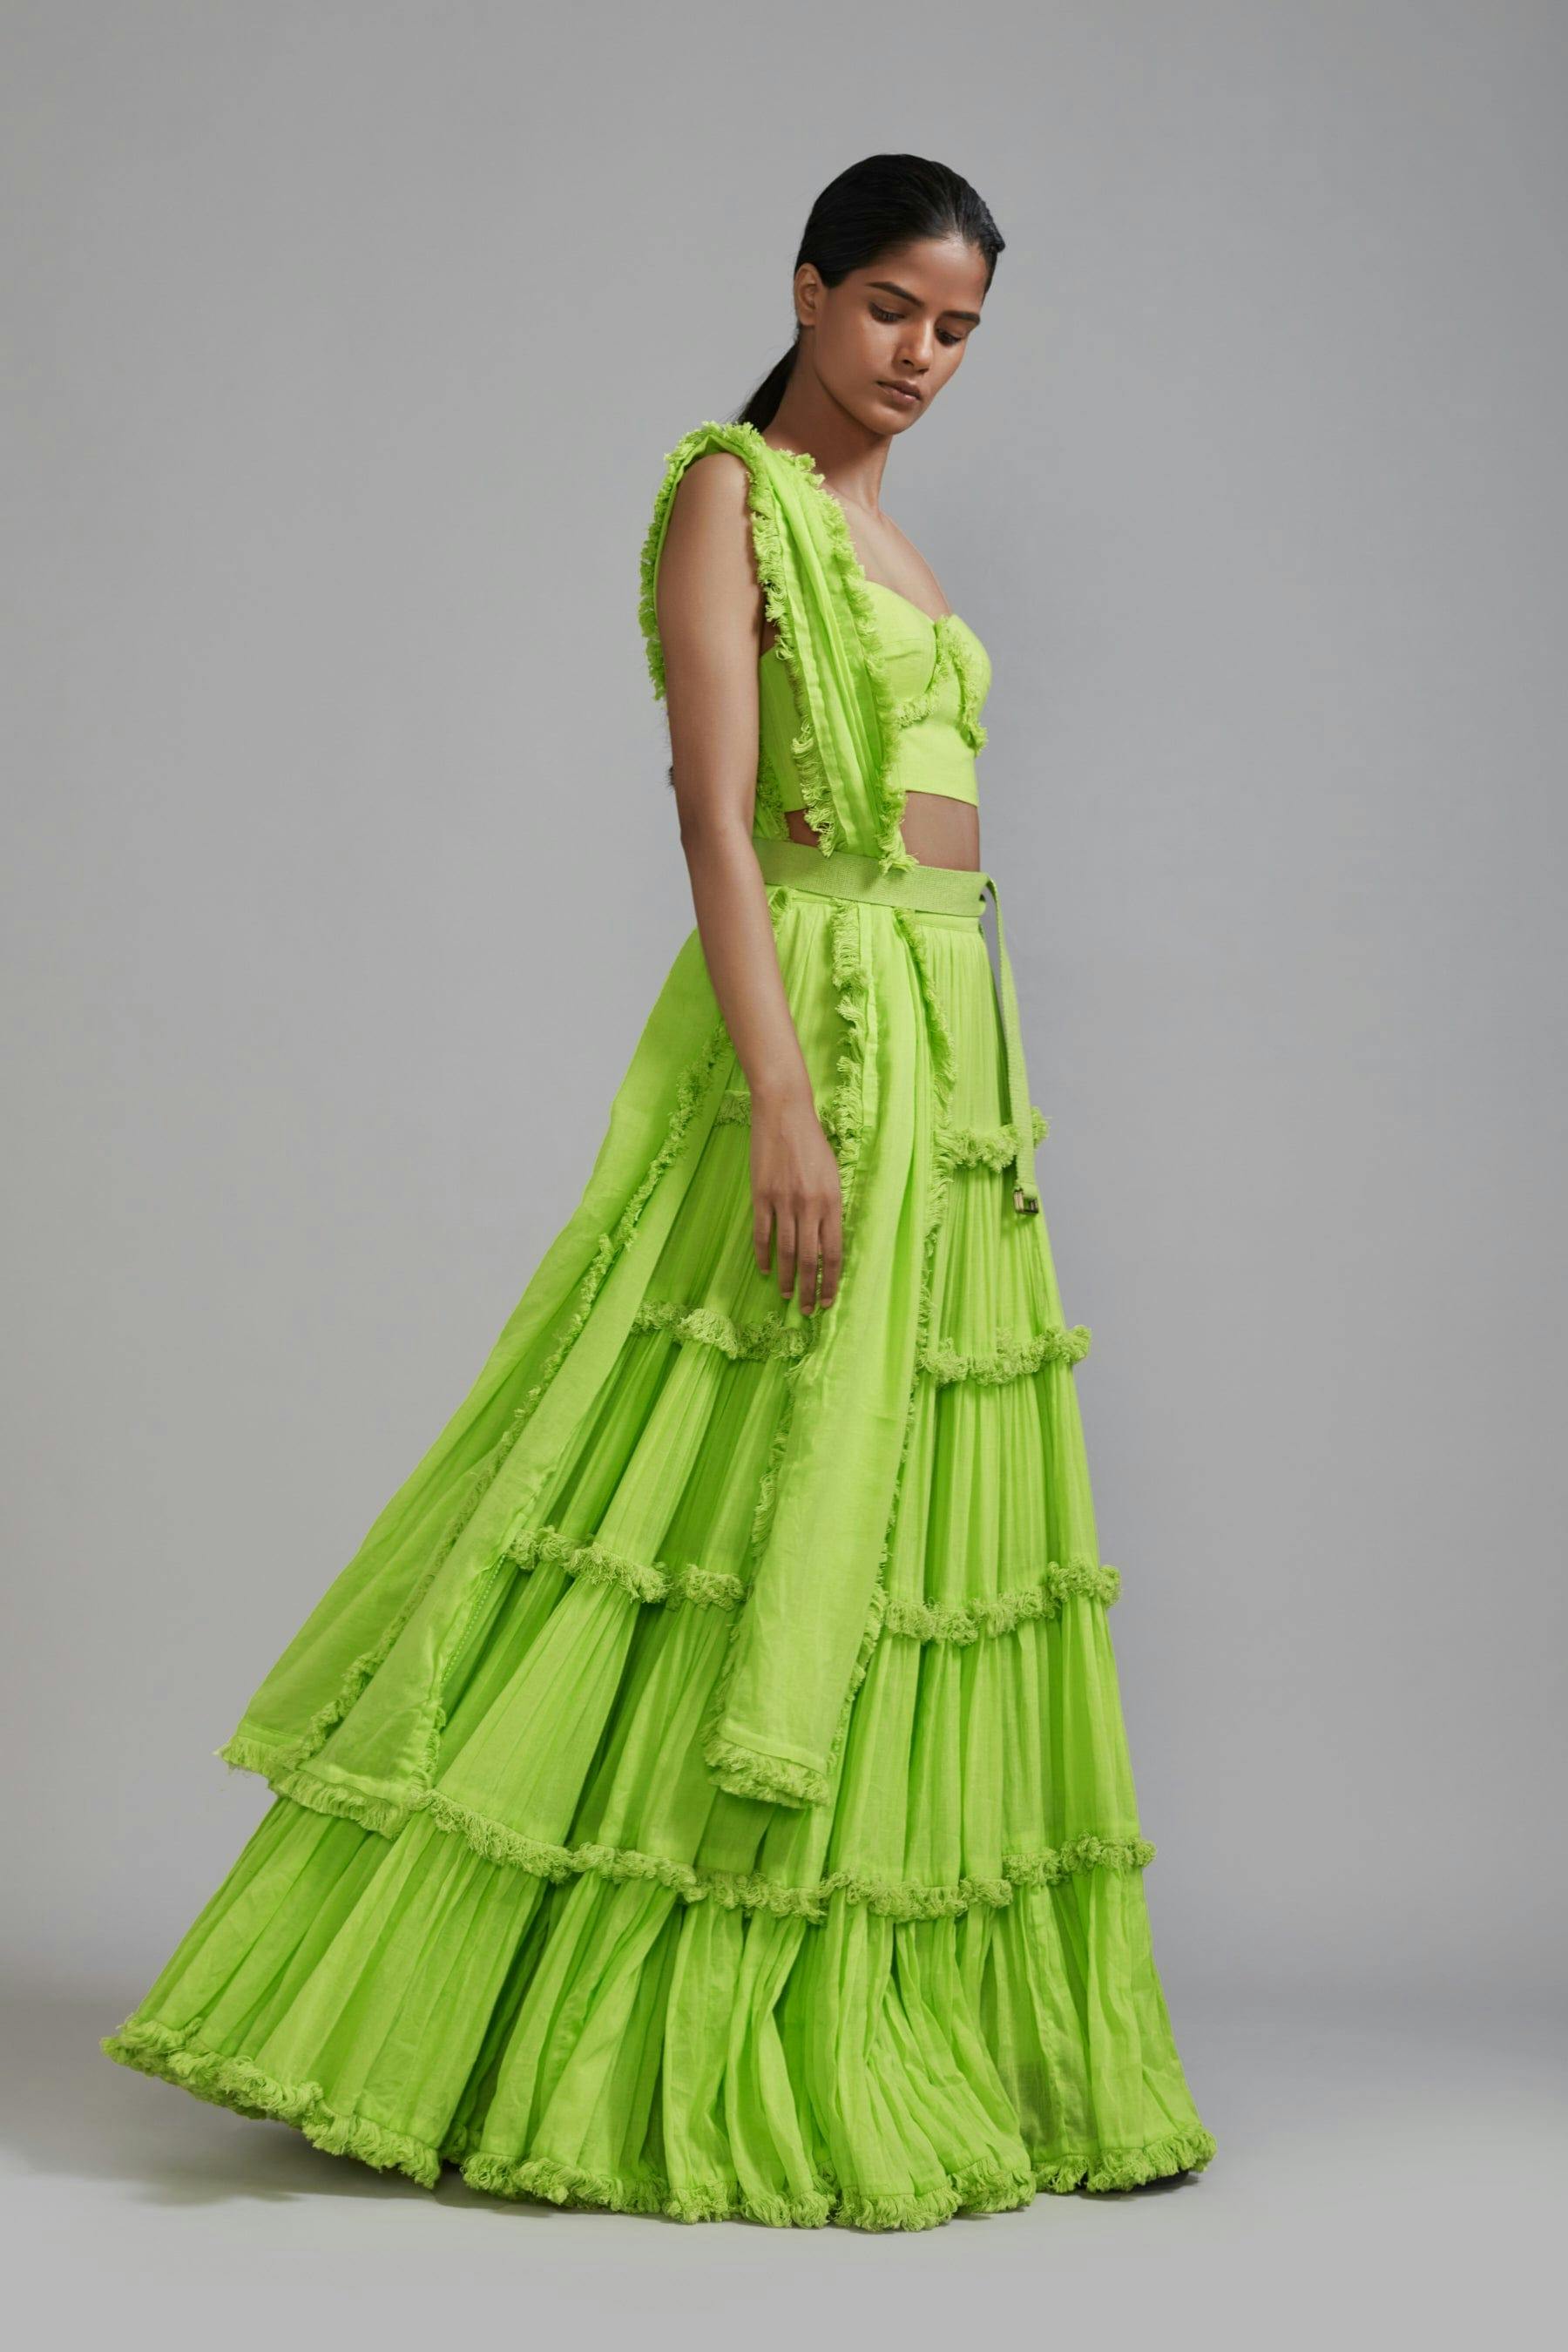 Neon Green Fringed Tiered Lehenga Set (3 PCS), a product by Style Mati